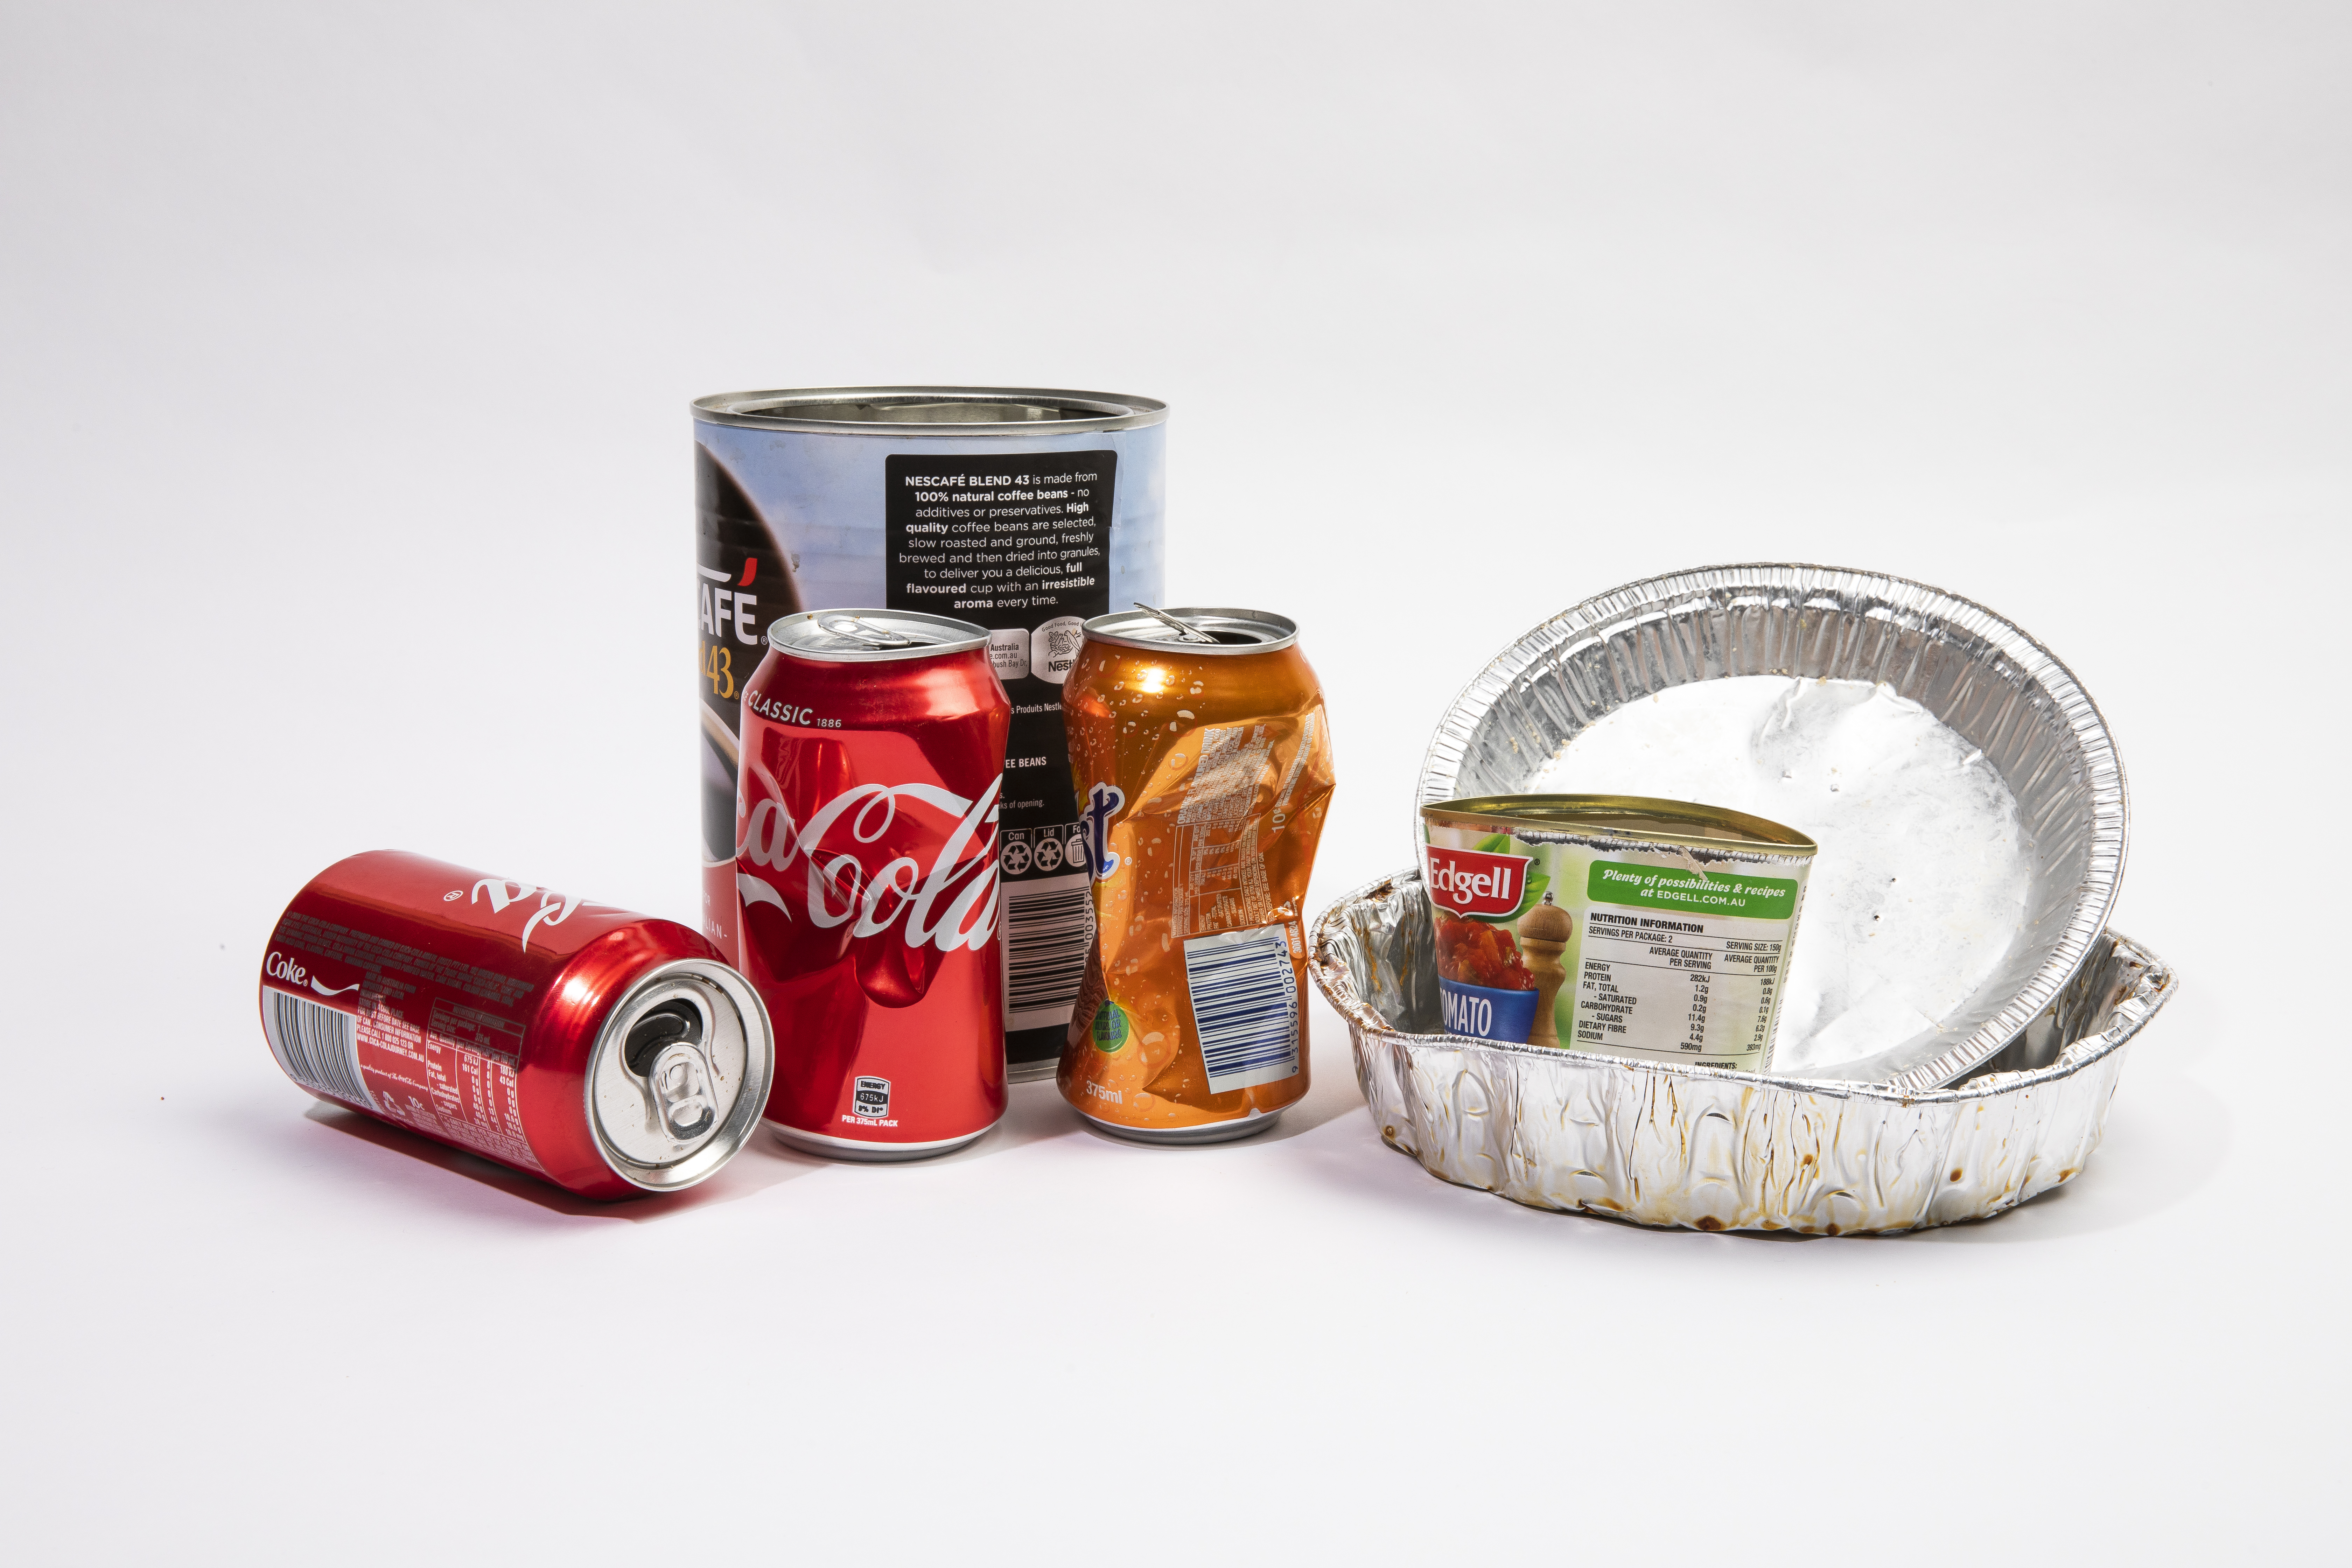 Image of empty aluminium containers for recycling